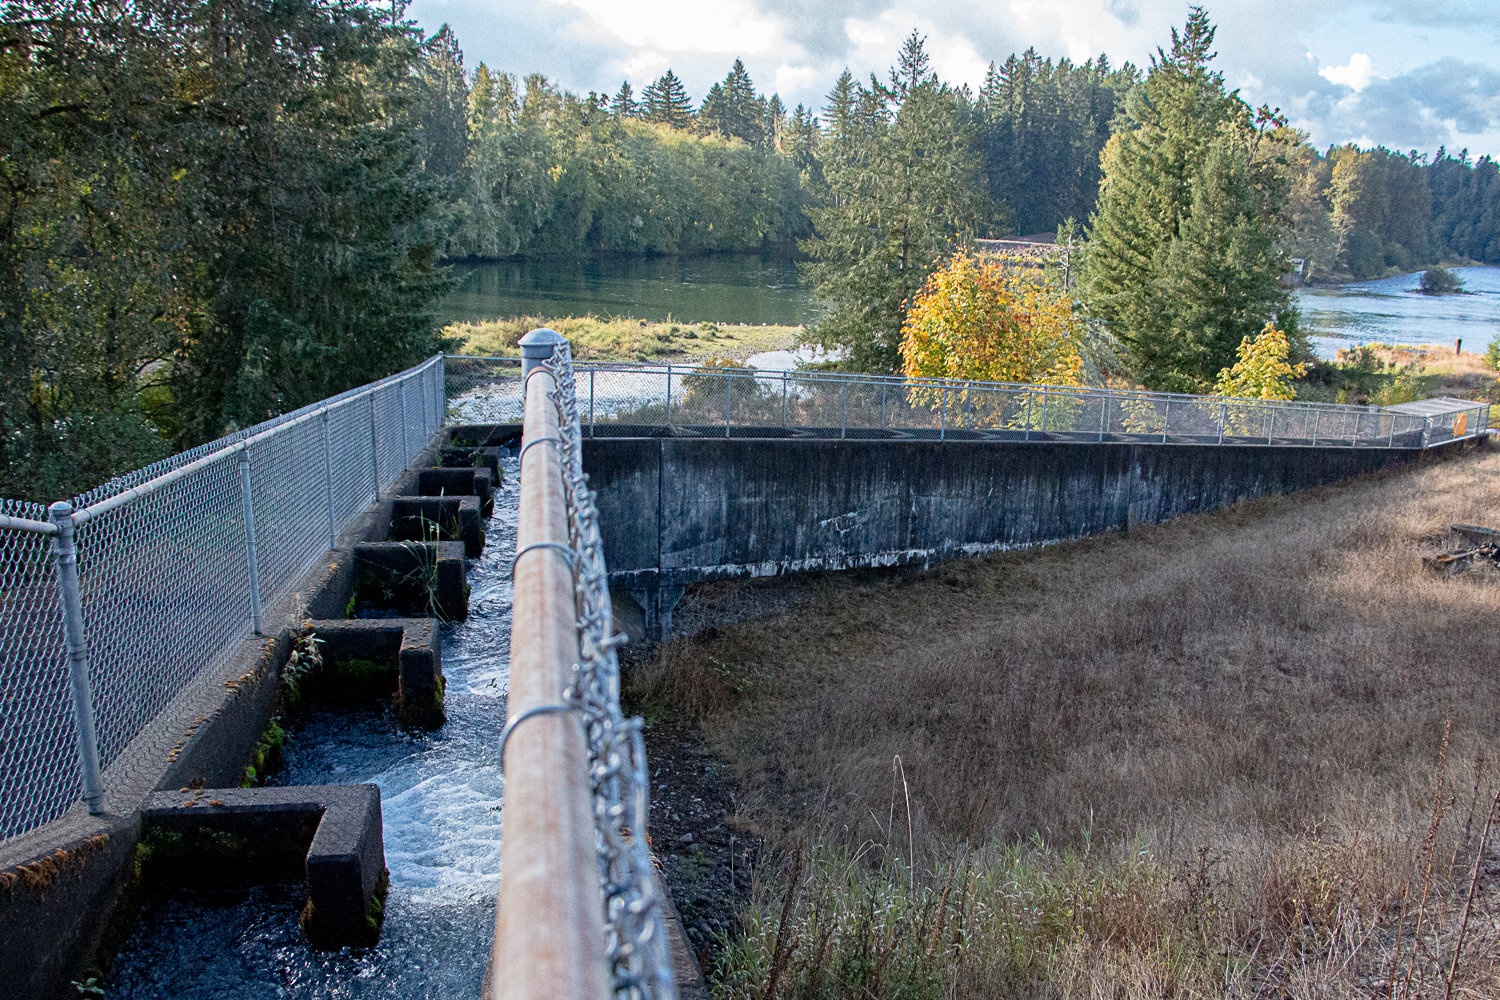 The fish passage bridge at the Cowlitz Salmon Hatchery helps adults swimming back up stream navigate around the Barrier Dam.